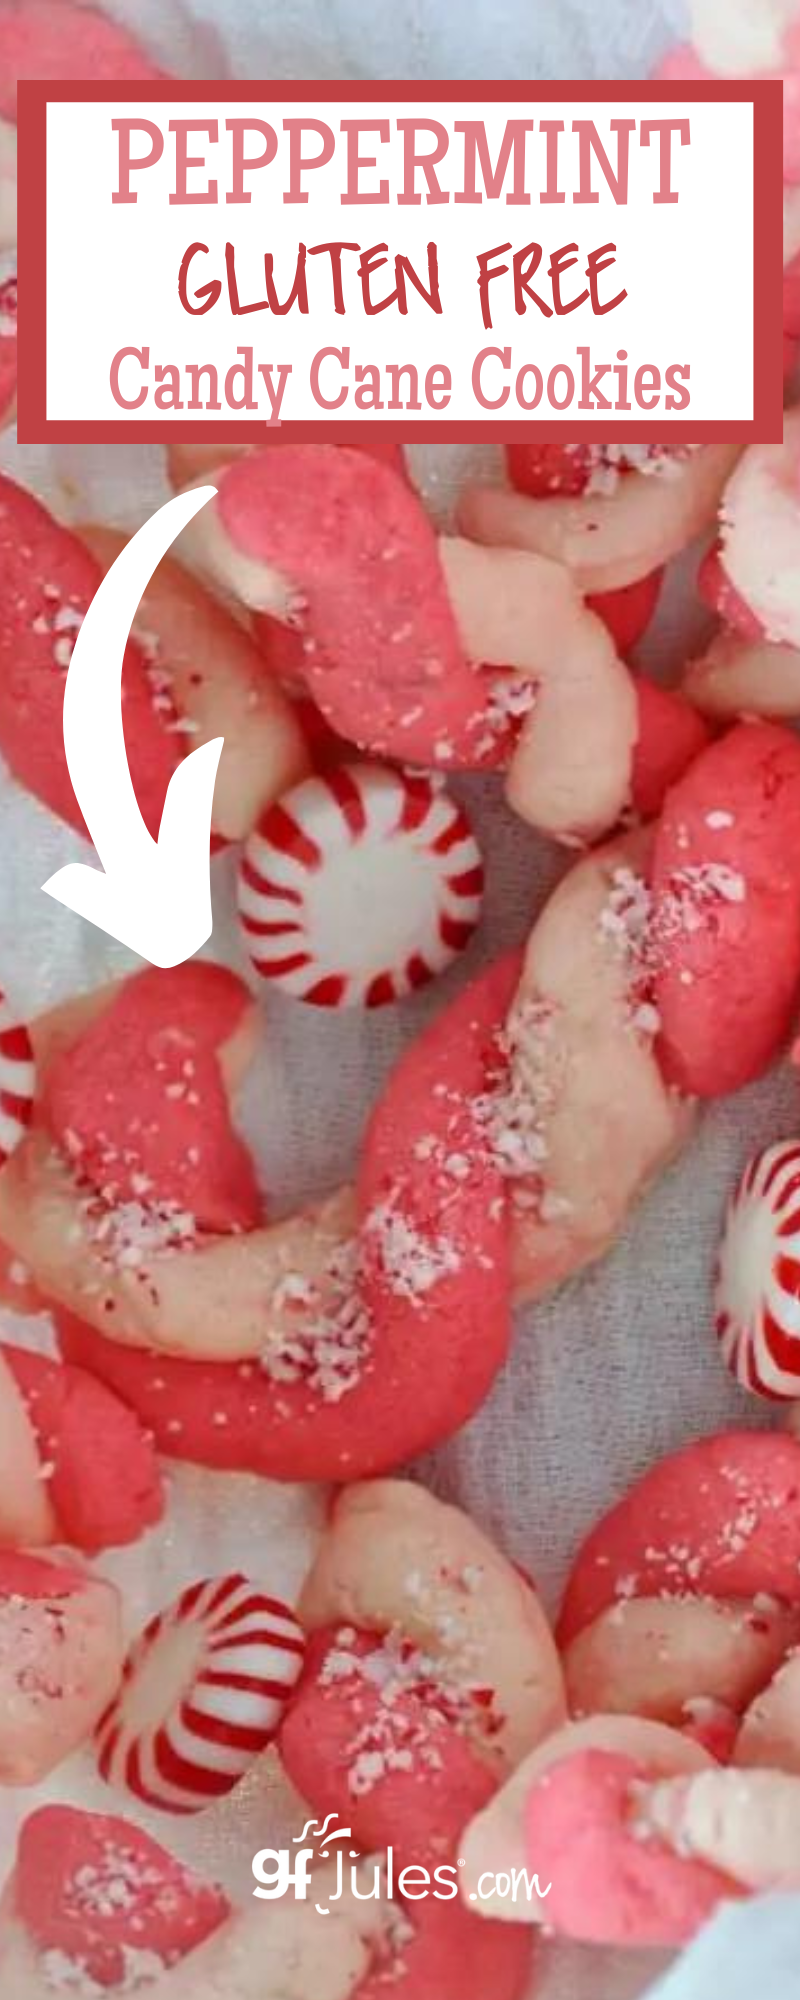 Peppermint Gluten Free Candy Cane Cookie